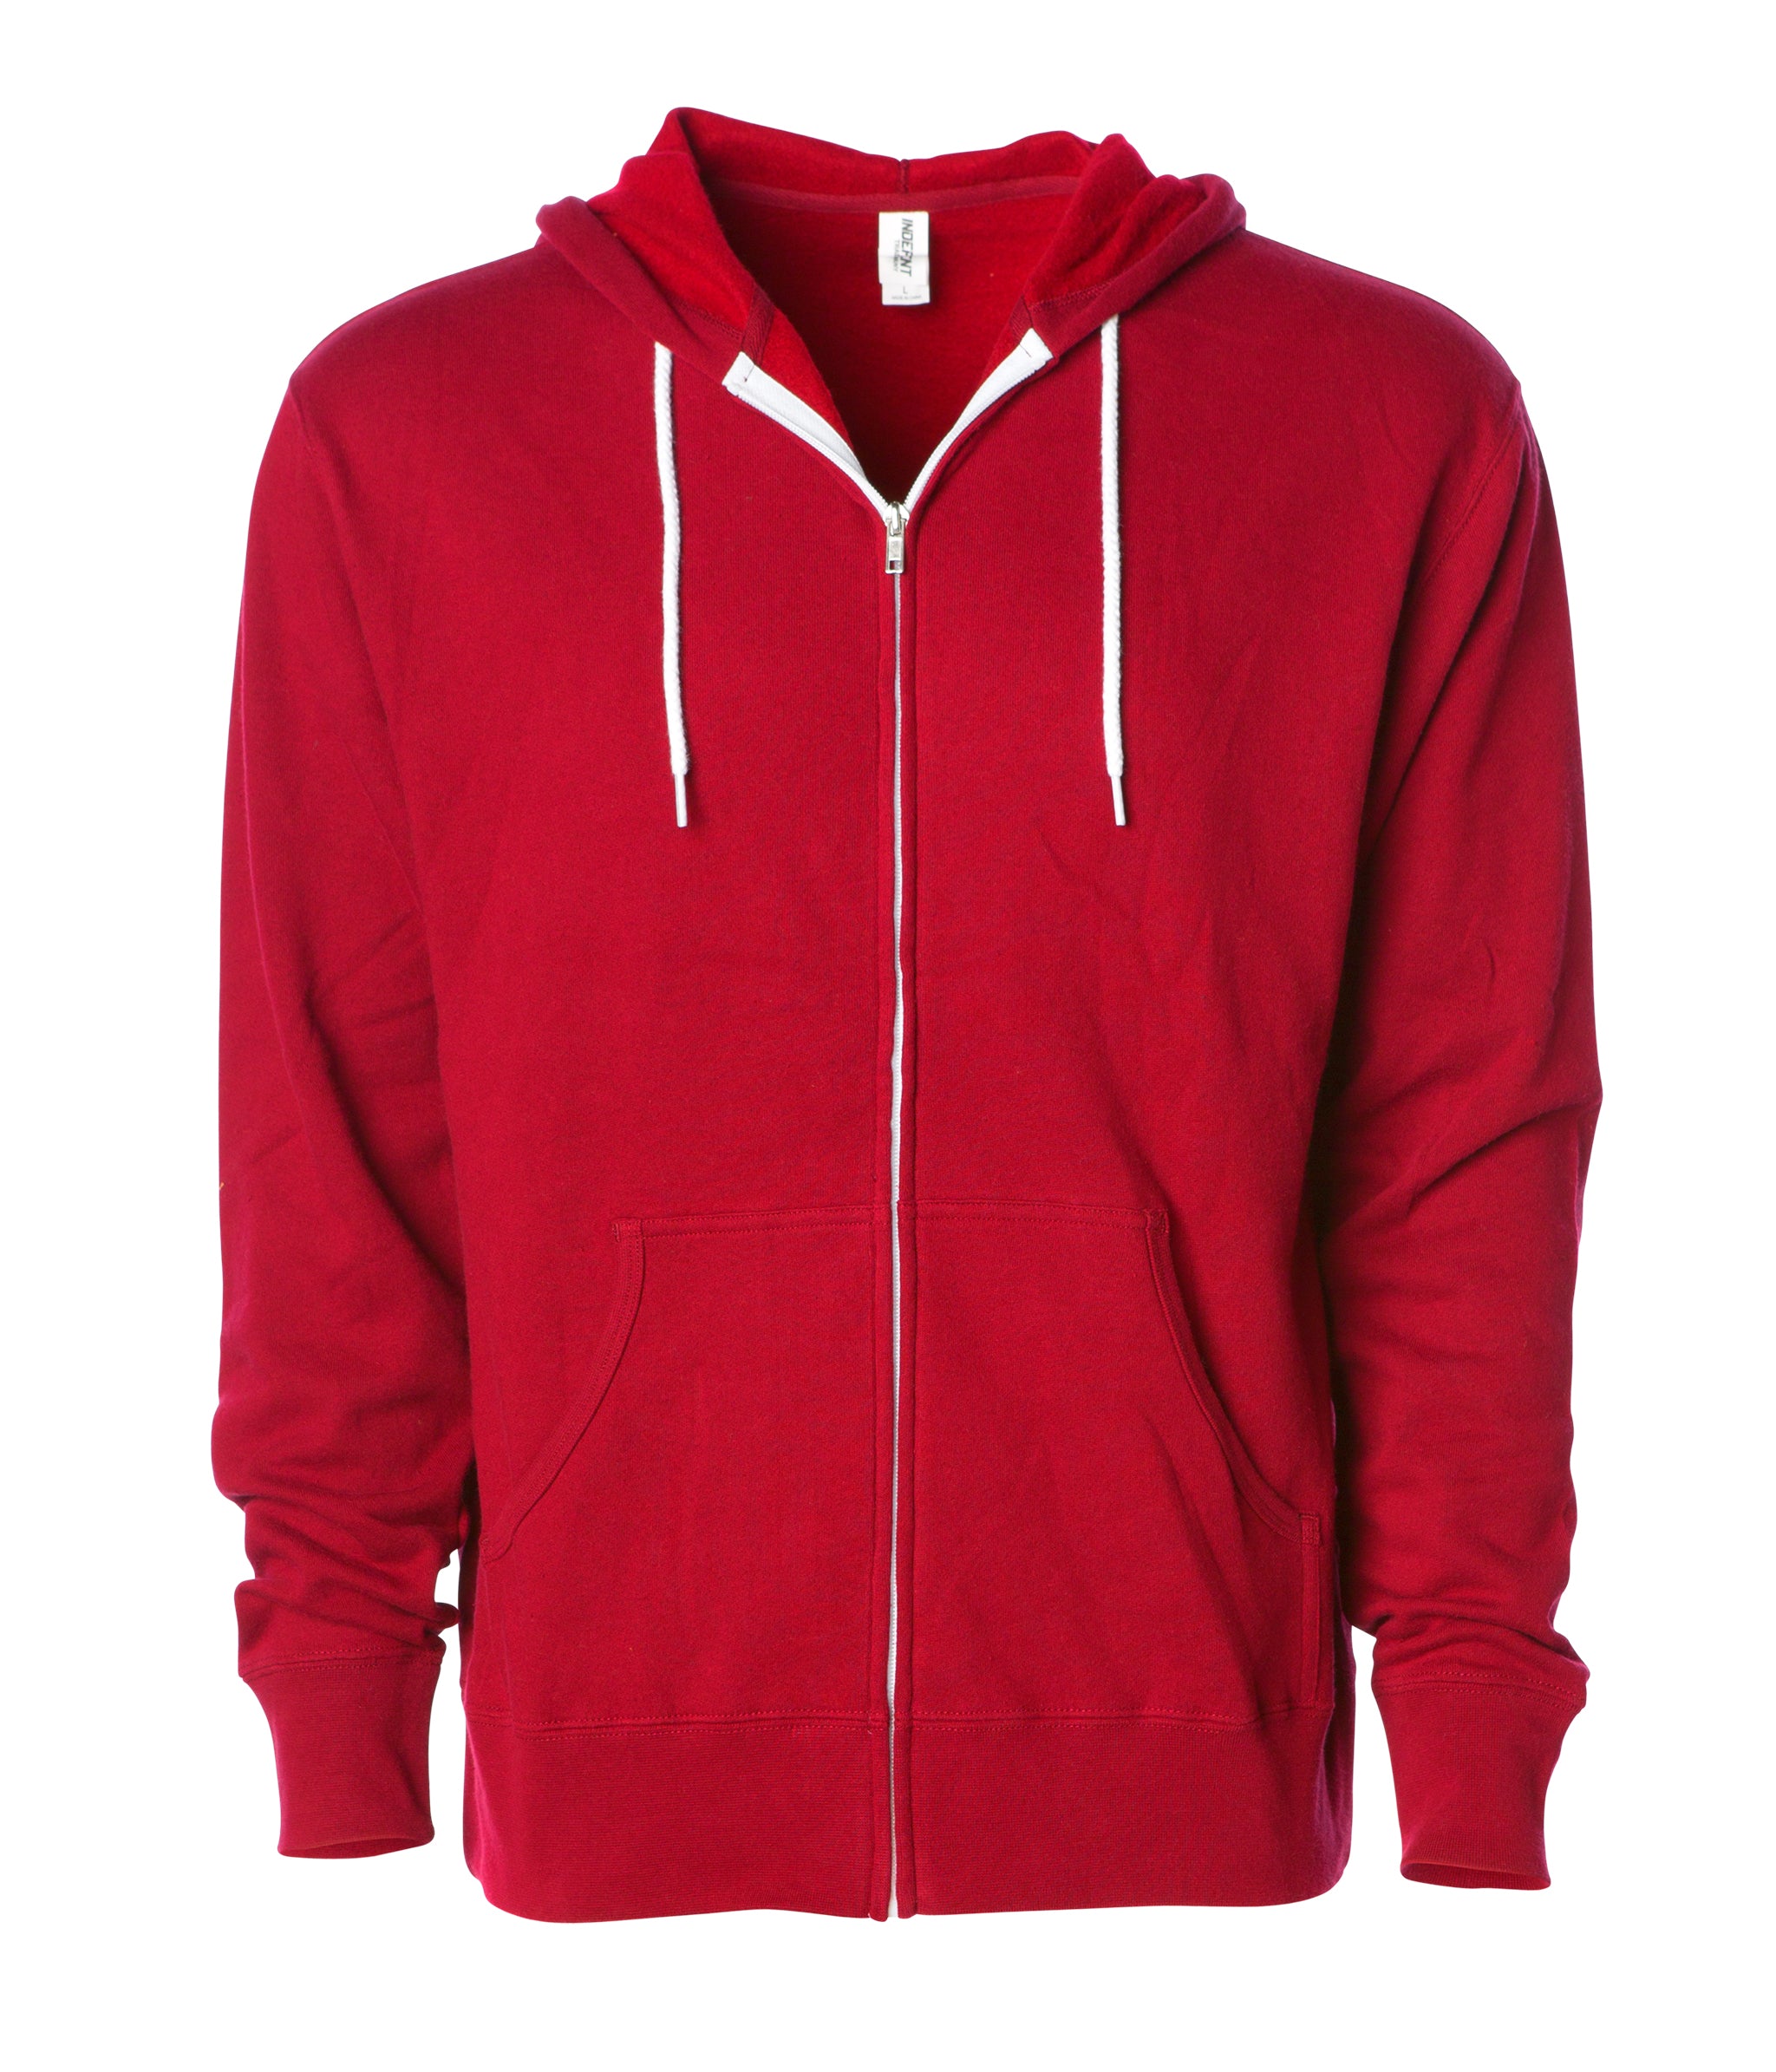 red hoodie sweater